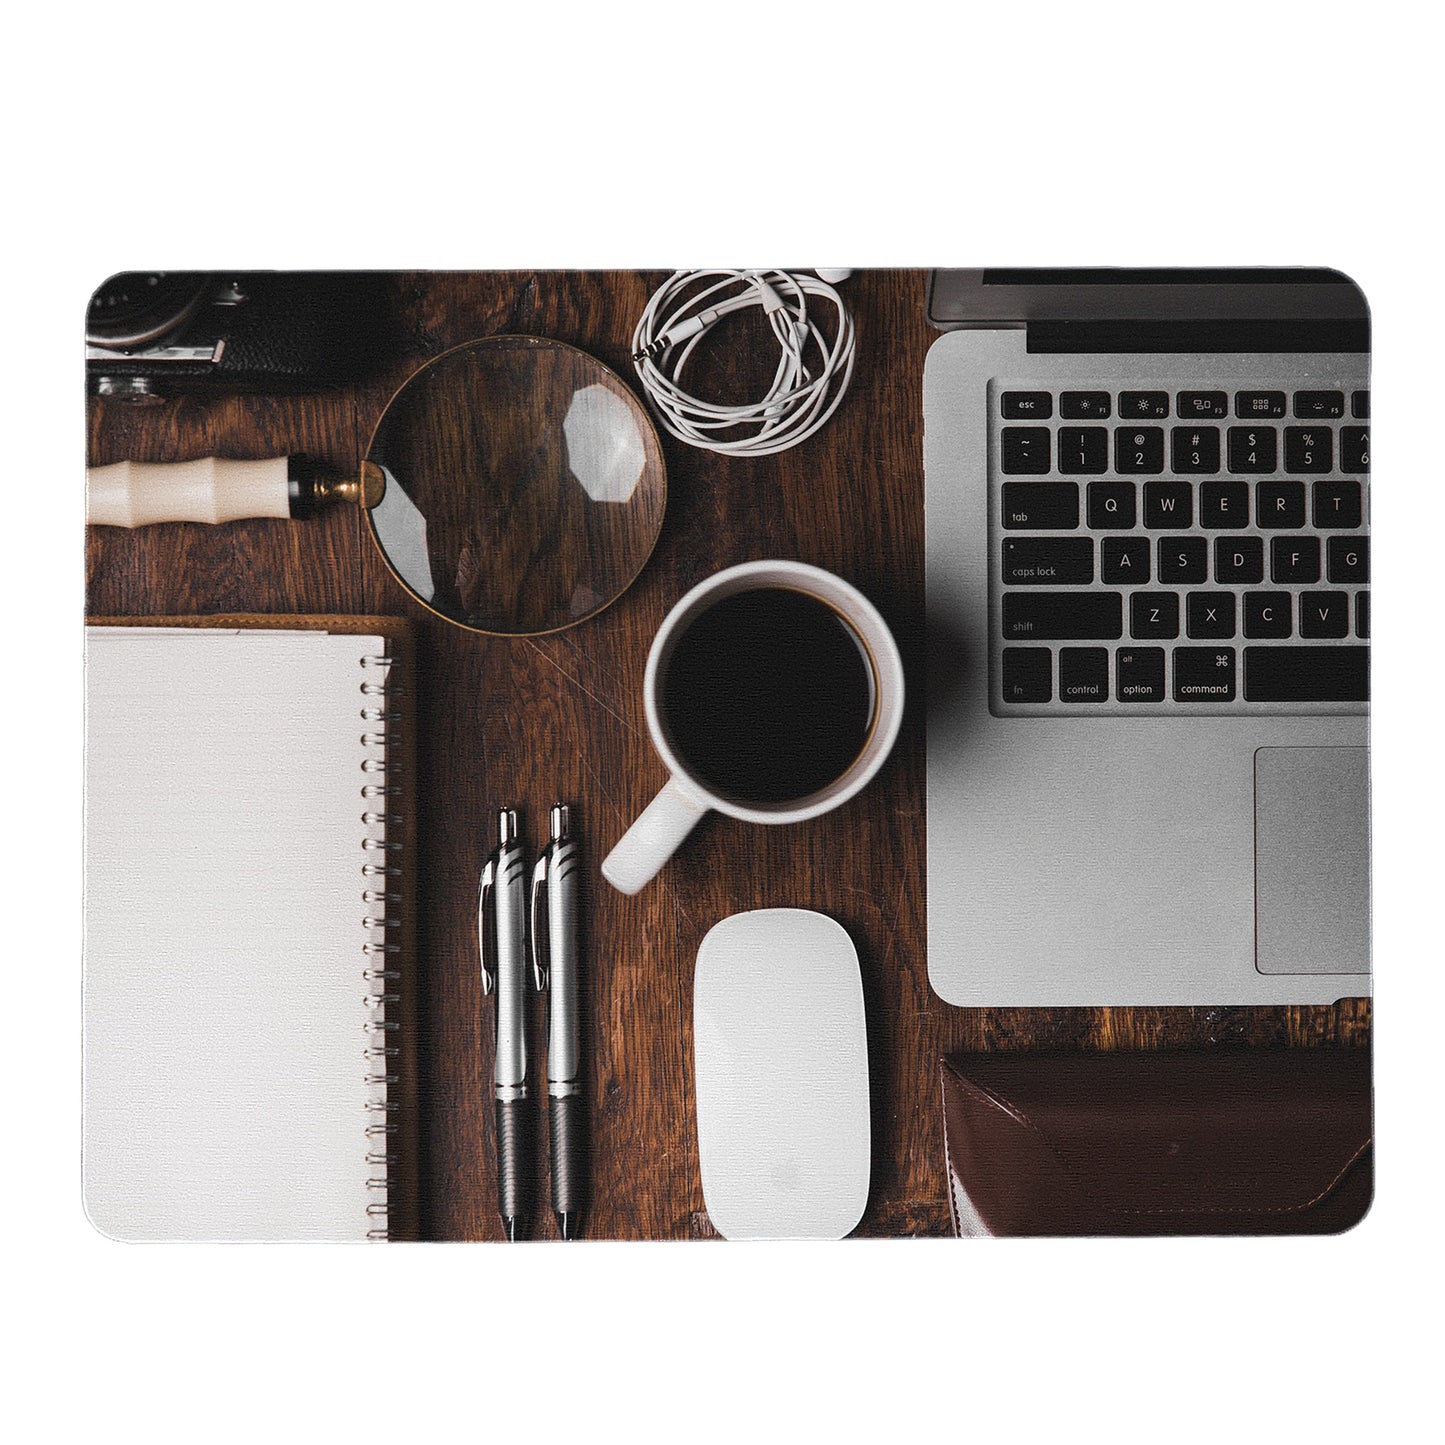 Corporate Work Space Mouse Pad